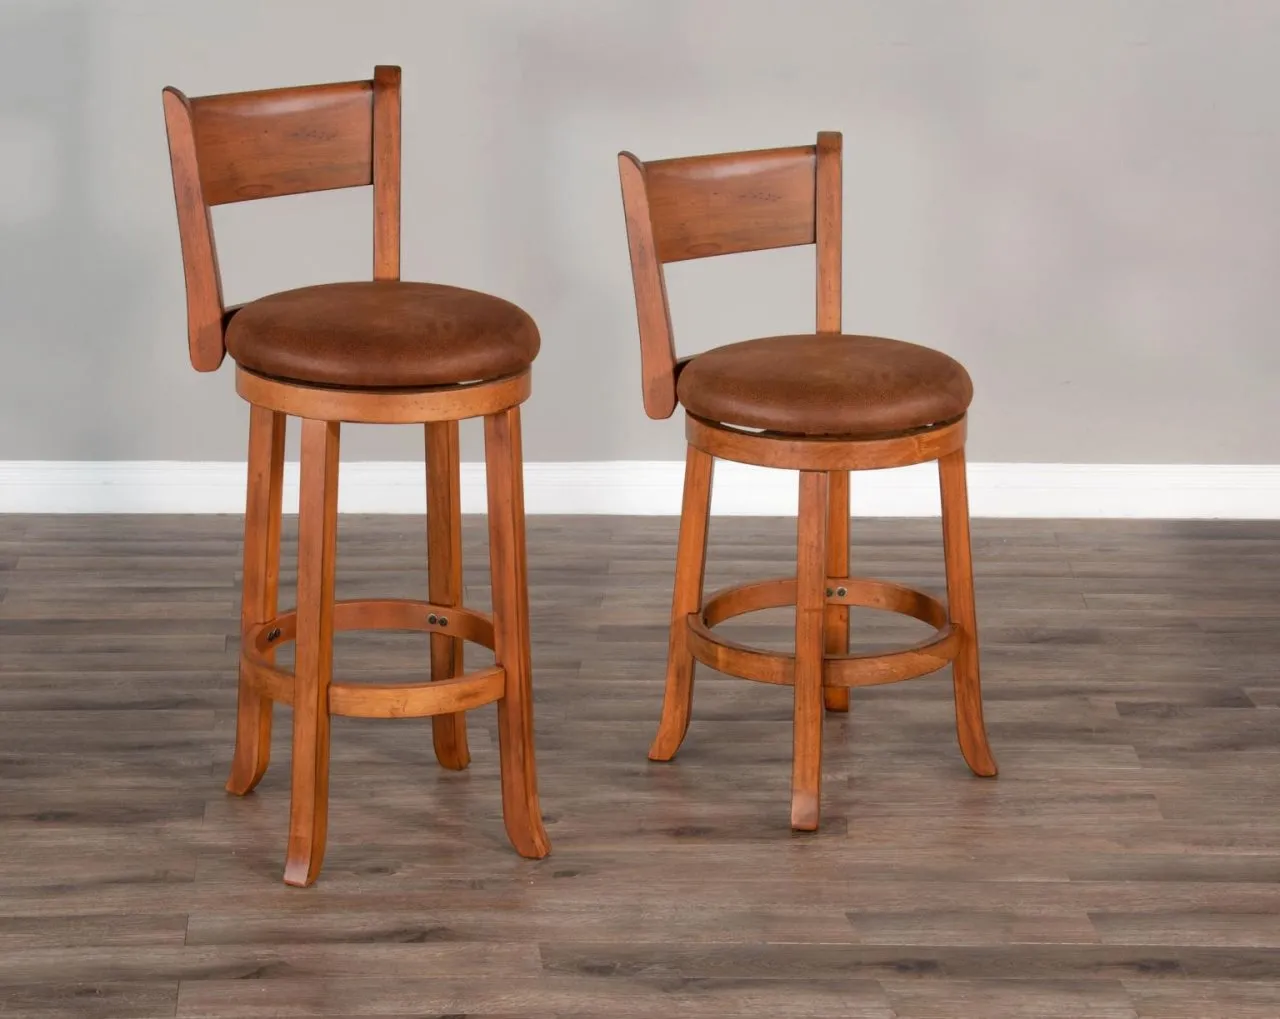 SEDONA RUSTIC OAK 30 INCH SWIVEL BAR COUNTER HEIGHT STOOL WITH CUSHIONED SEAT & BACK